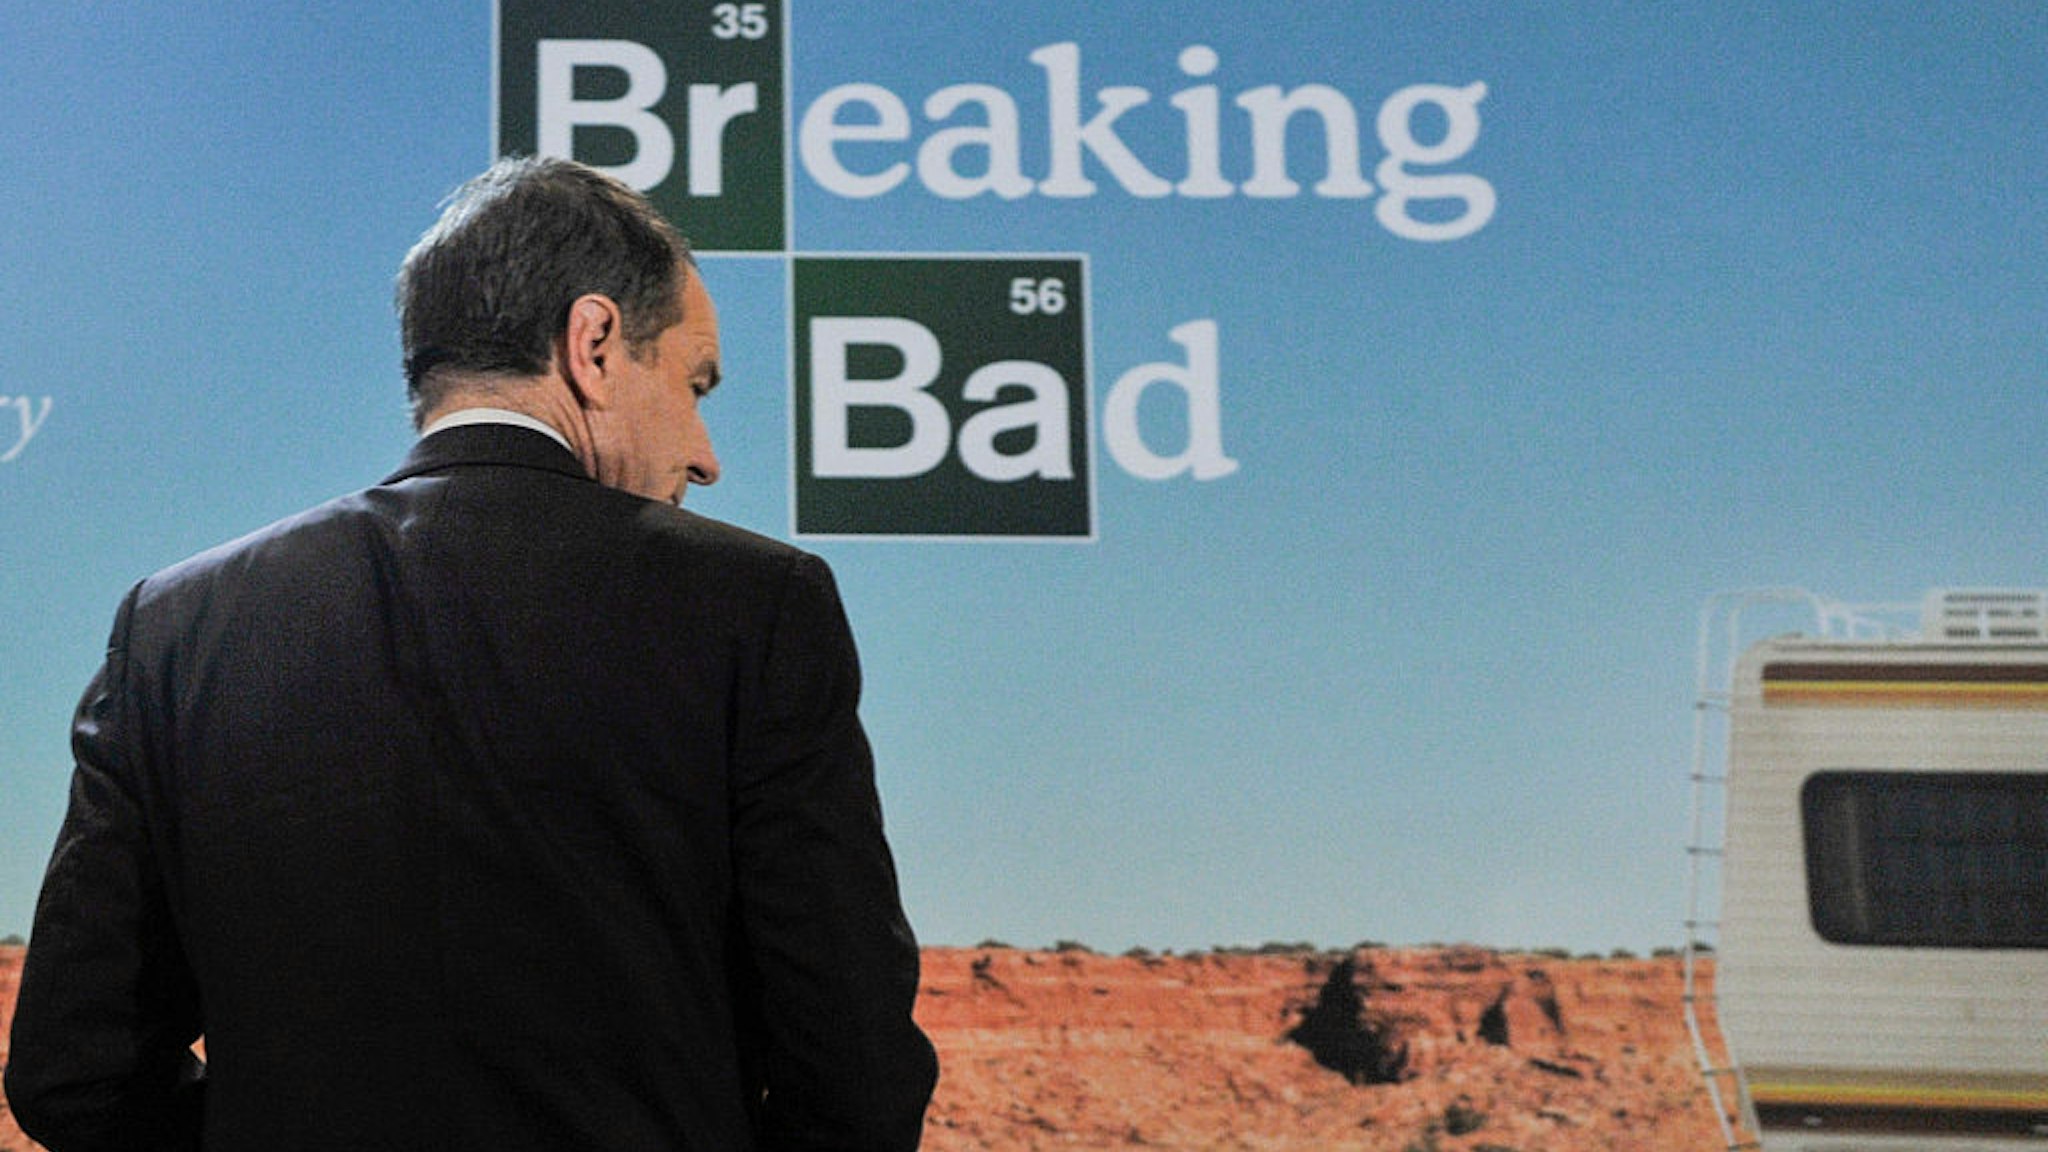 Actor Bryan Cranston speaks during a donation ceremony of artifacts from AMC's "Breaking Bad" show at Smithsonian's National Museum of American History in Washington DC on November 10, 2015.